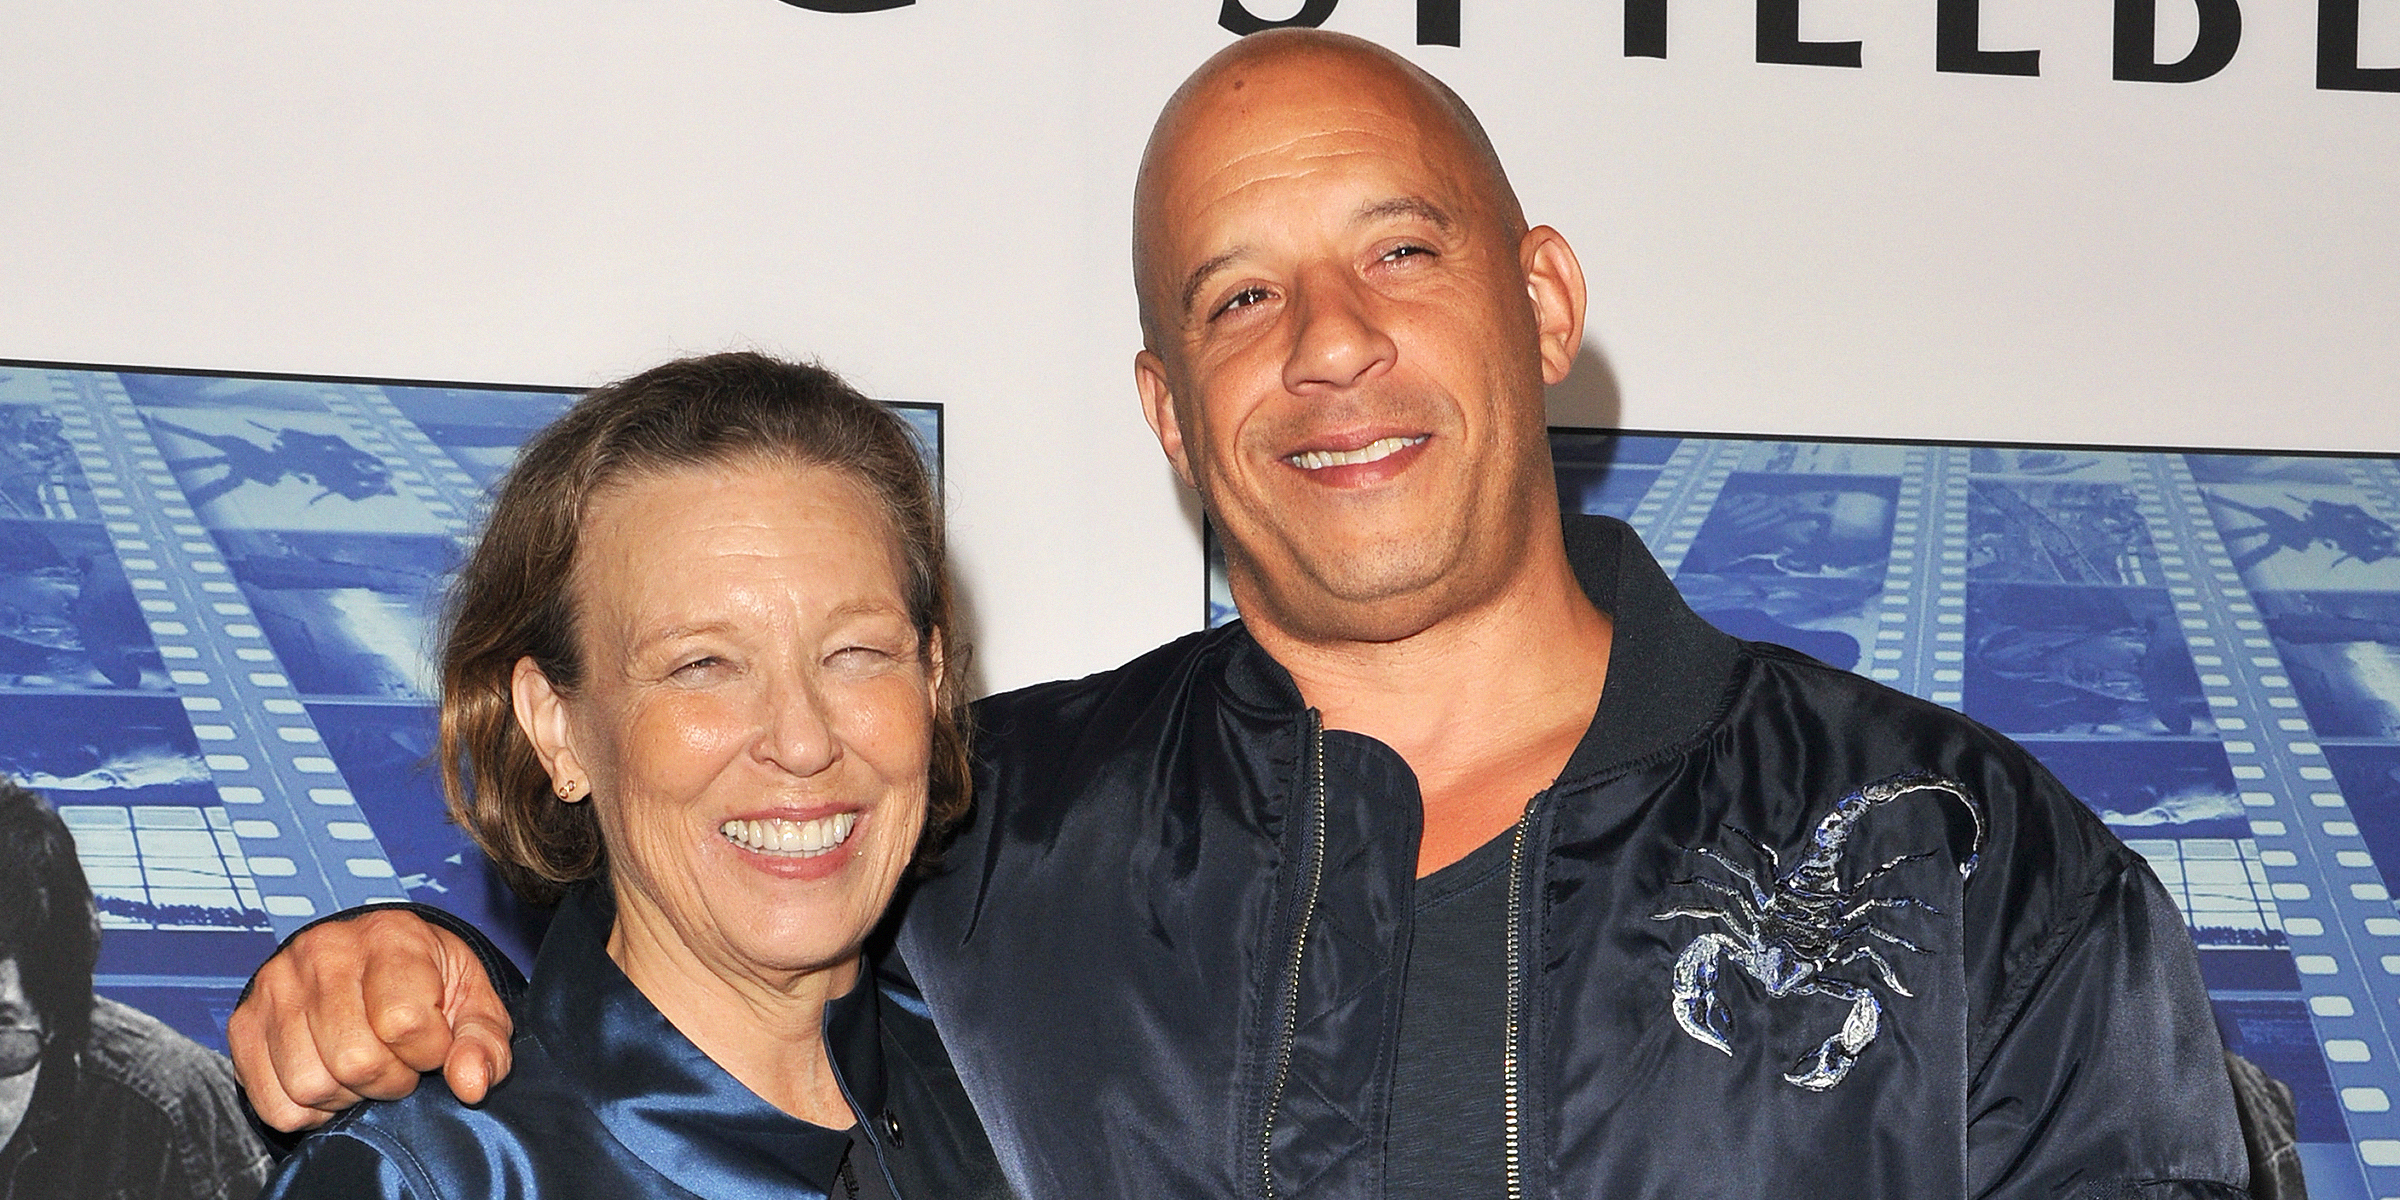 Delora Vincent and Vin Diesel. | Source: Getty Images